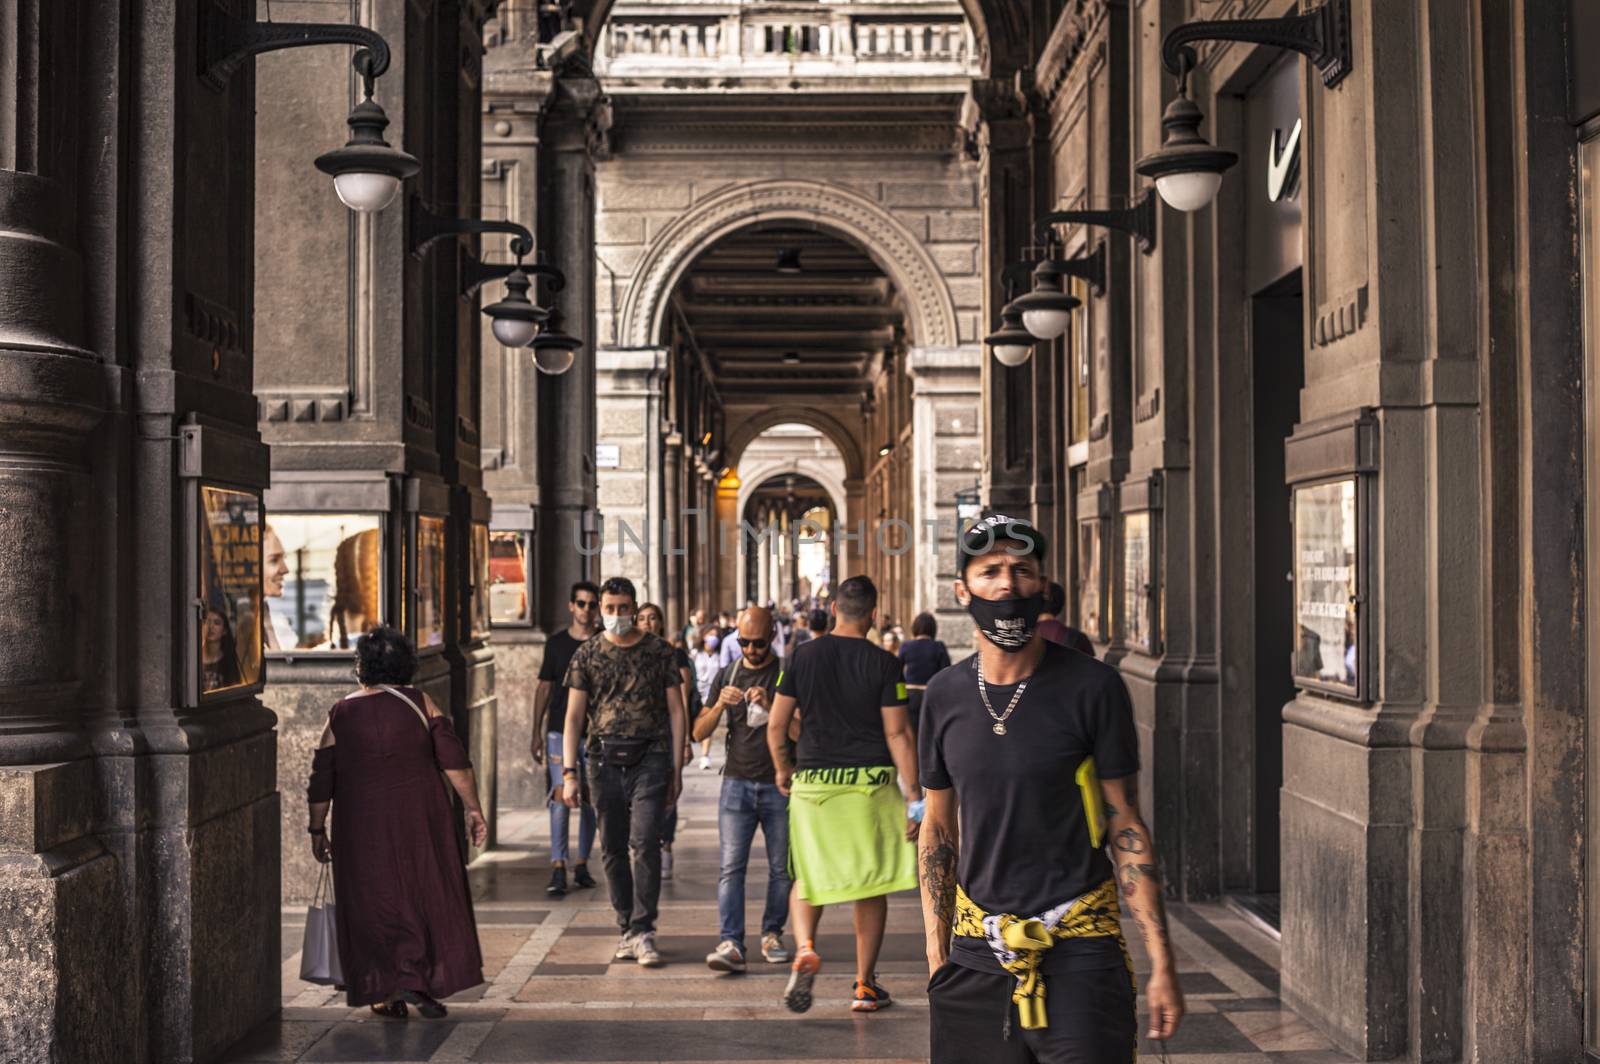 People walking under Bologna's Arcades in Italy by pippocarlot